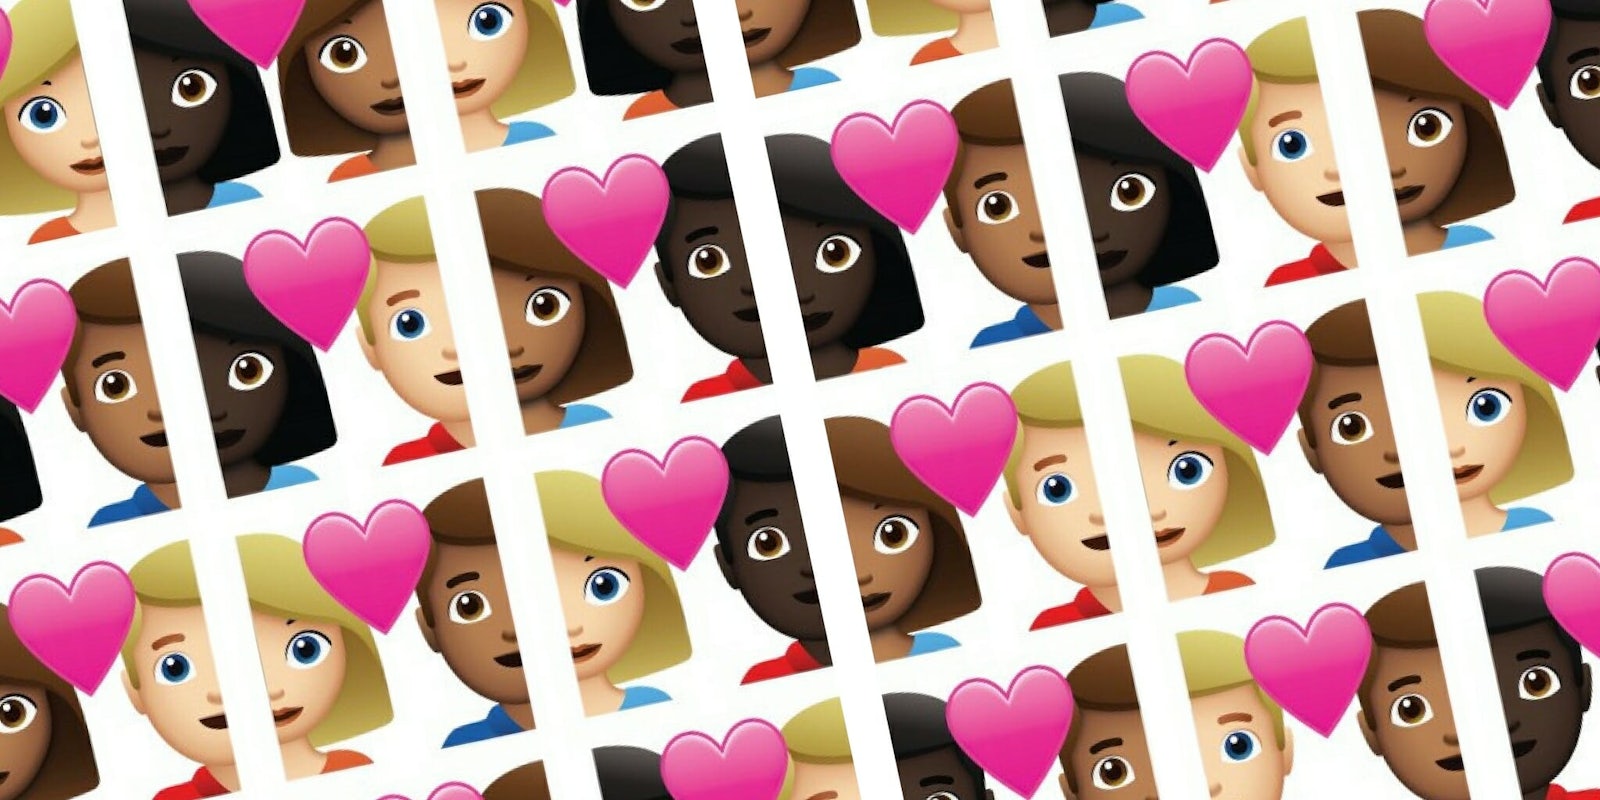 Tinder has proposed an official emoji selection of interracial couples to Unicode.